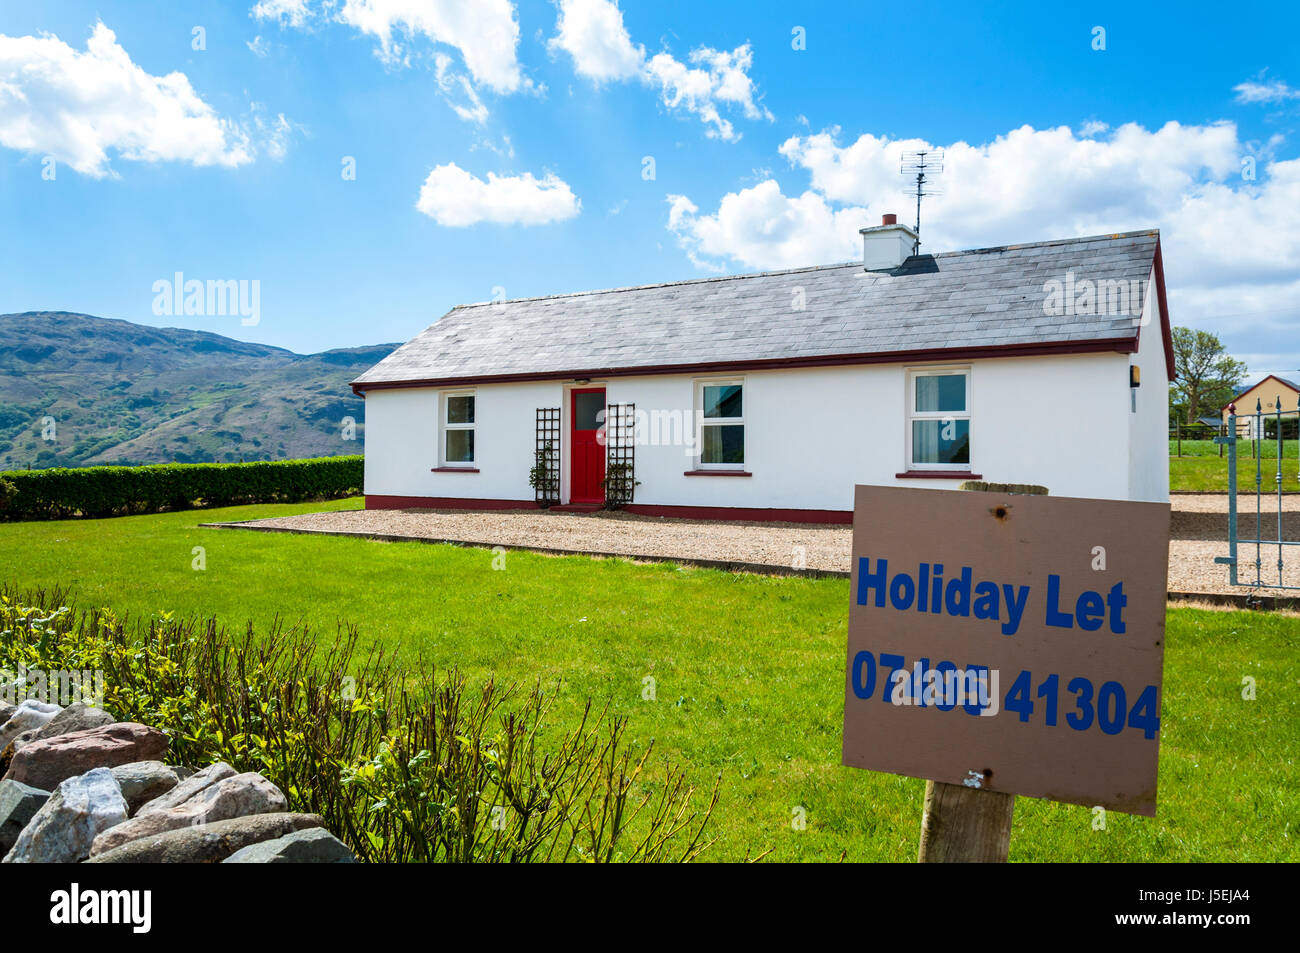 Holiday Cottage To Let Sign Loughros Point Ardara County